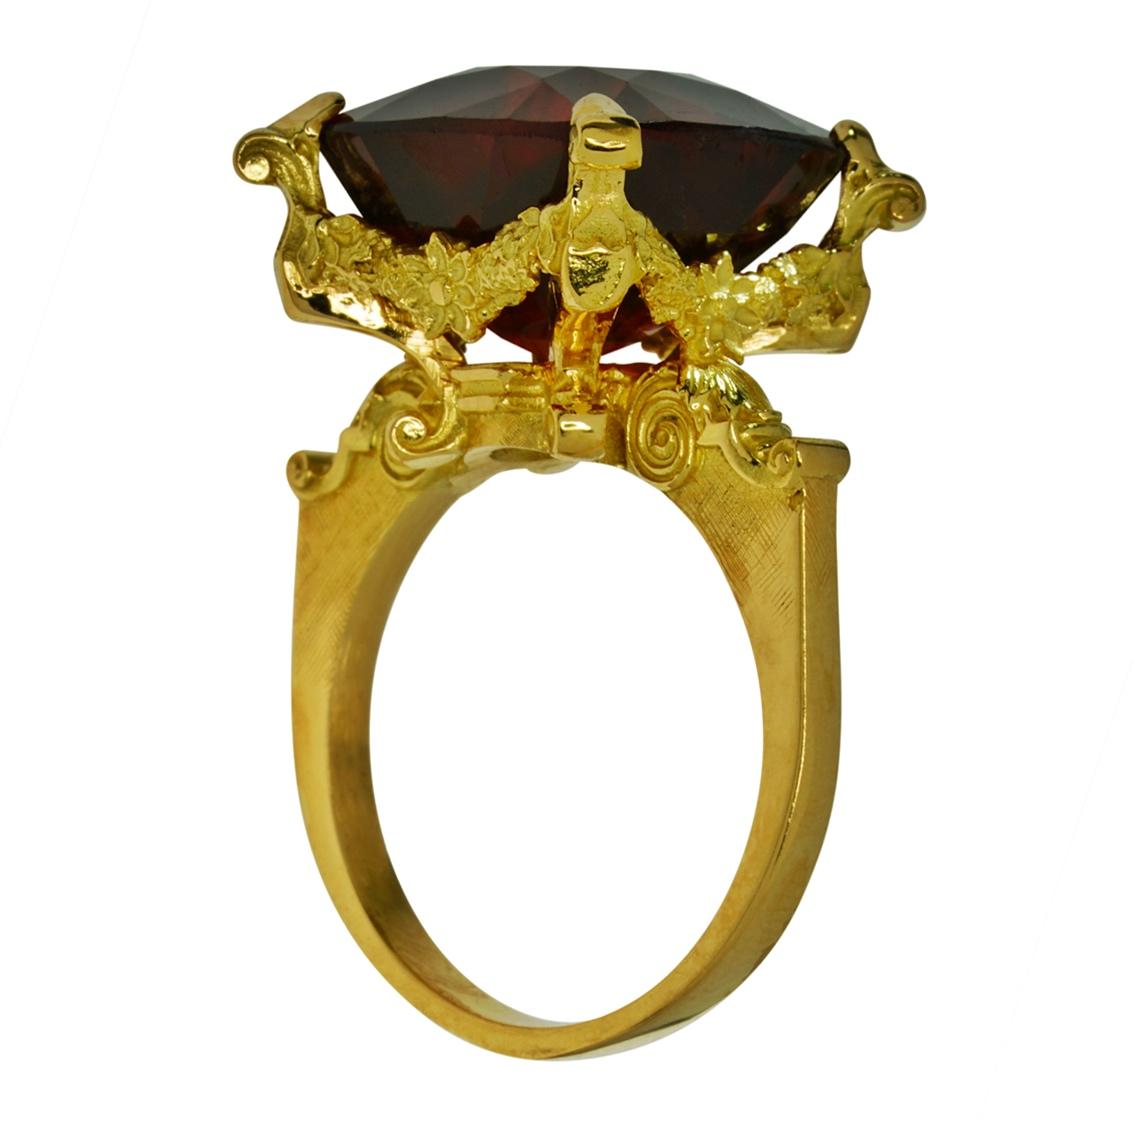 Dionysus and the Nymphs of Nysa Ring in 18kt Gold, Cushion Cut 20.98ct Garnet For Sale 6